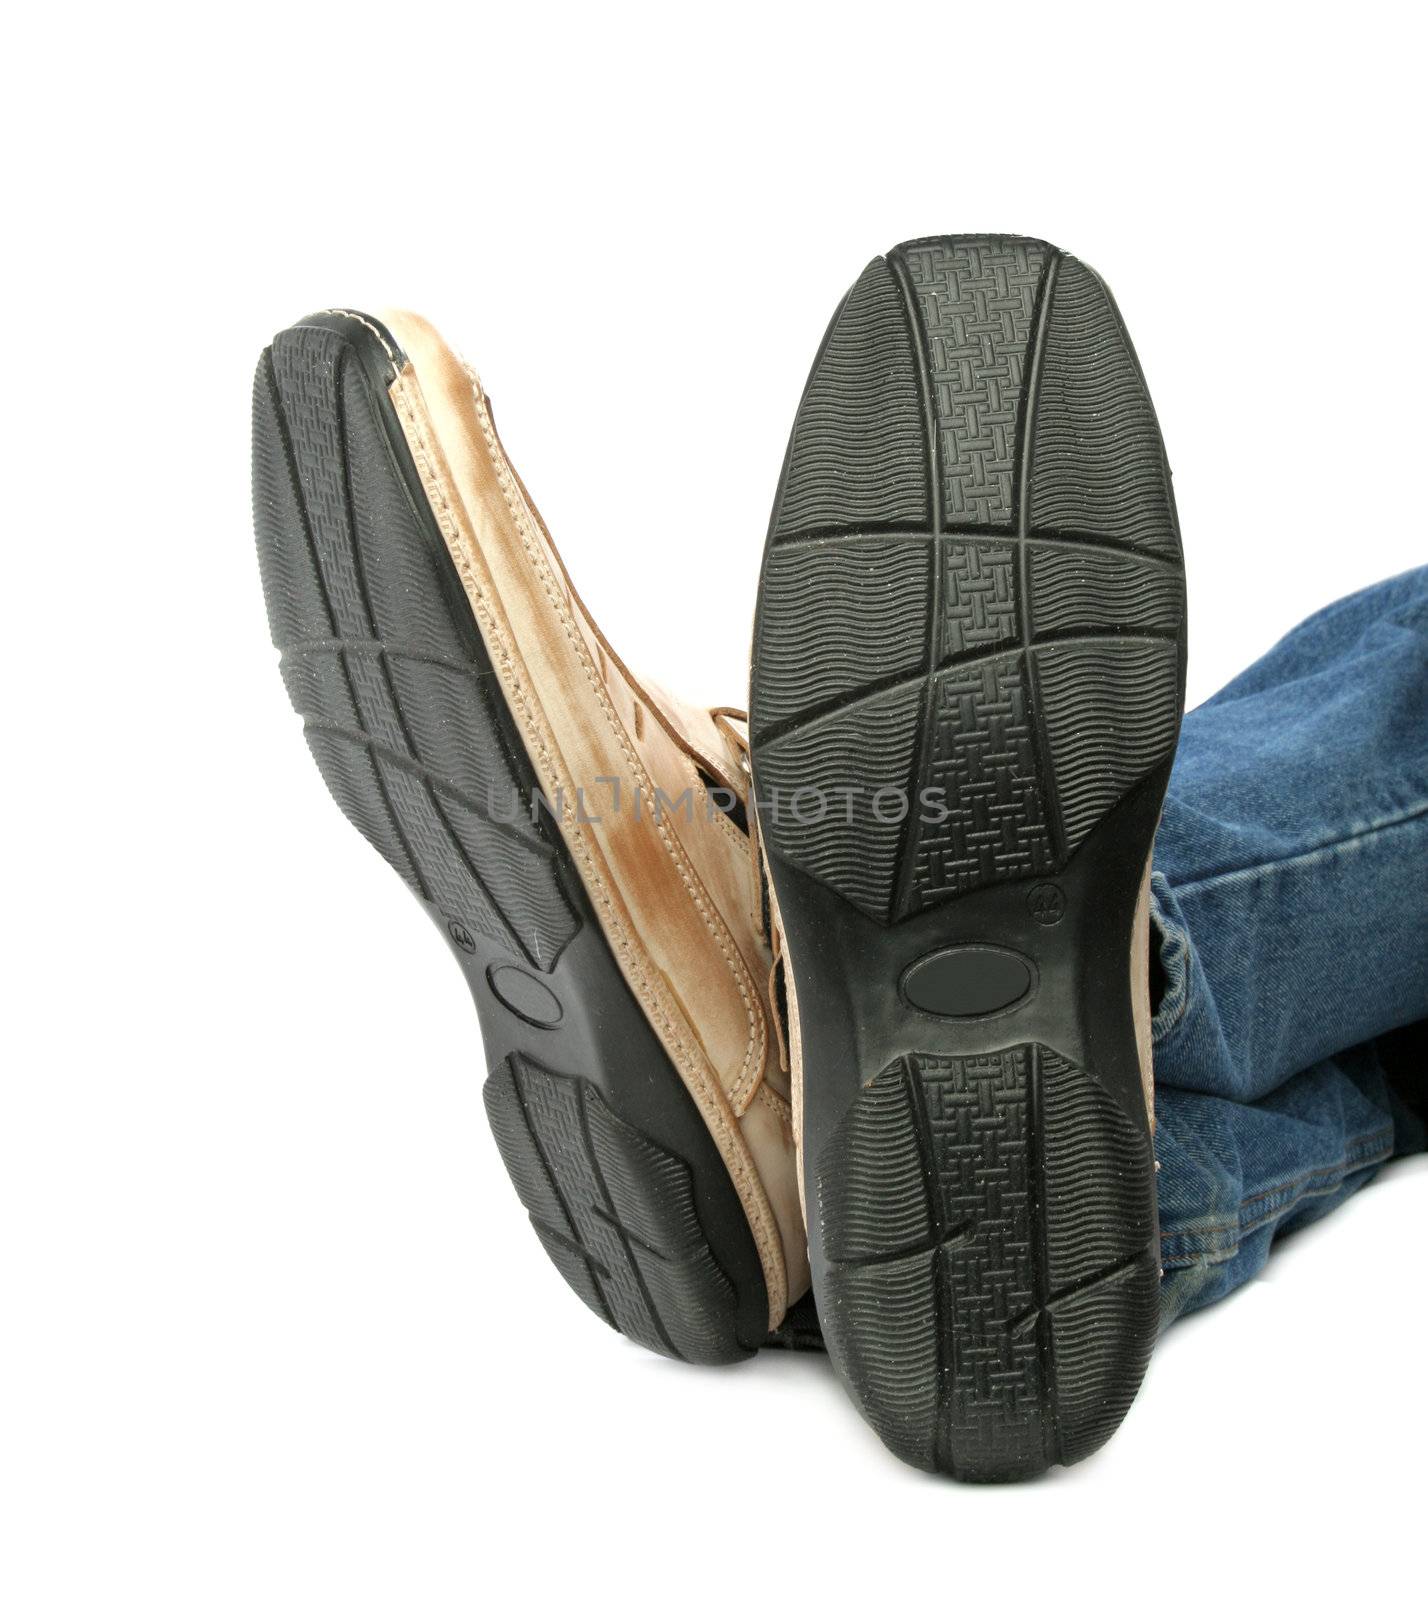 Human foot with brown leather shoes and jeans, isolated on white